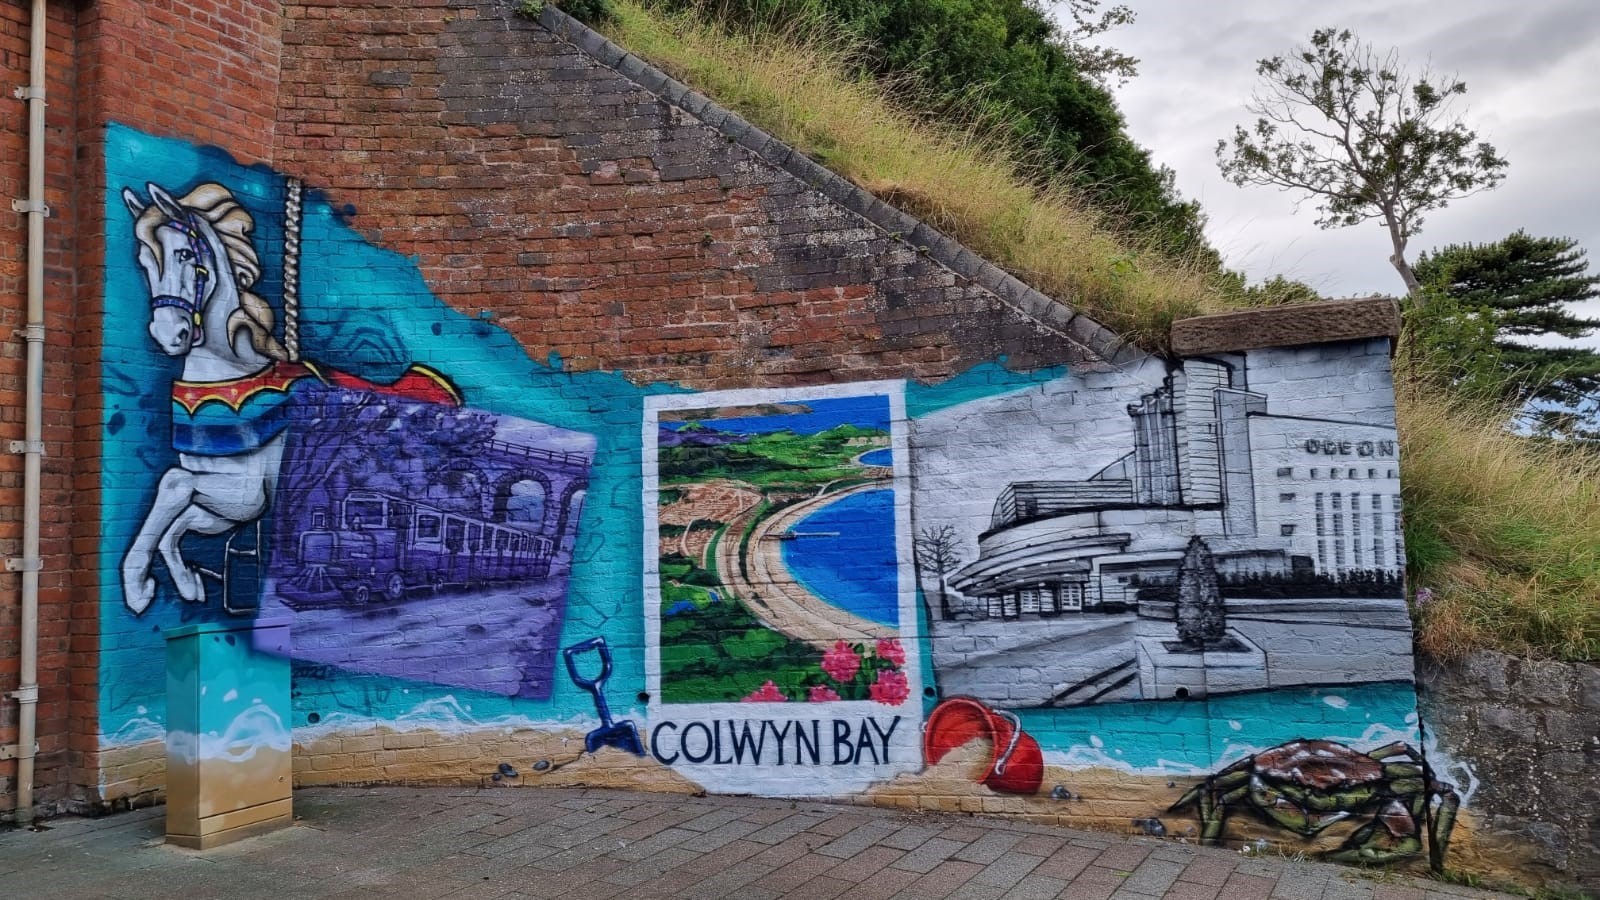 The mural celebrates the history of Colwyn Bay, including old attractions and seaside scenes.